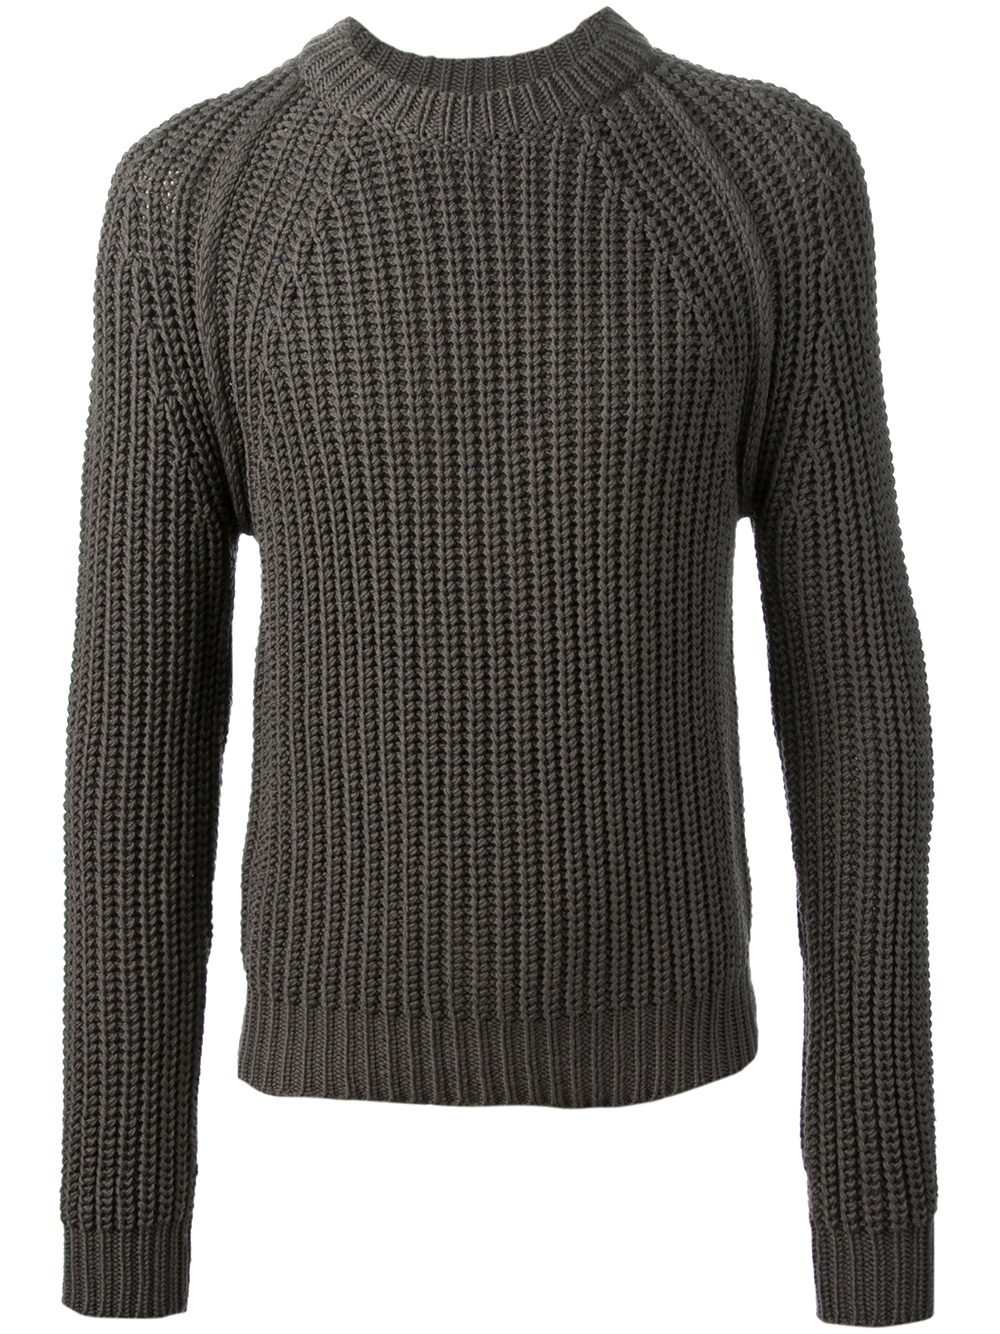 Lyst - Lanvin Thick Ribbed Sweater in Gray for Men